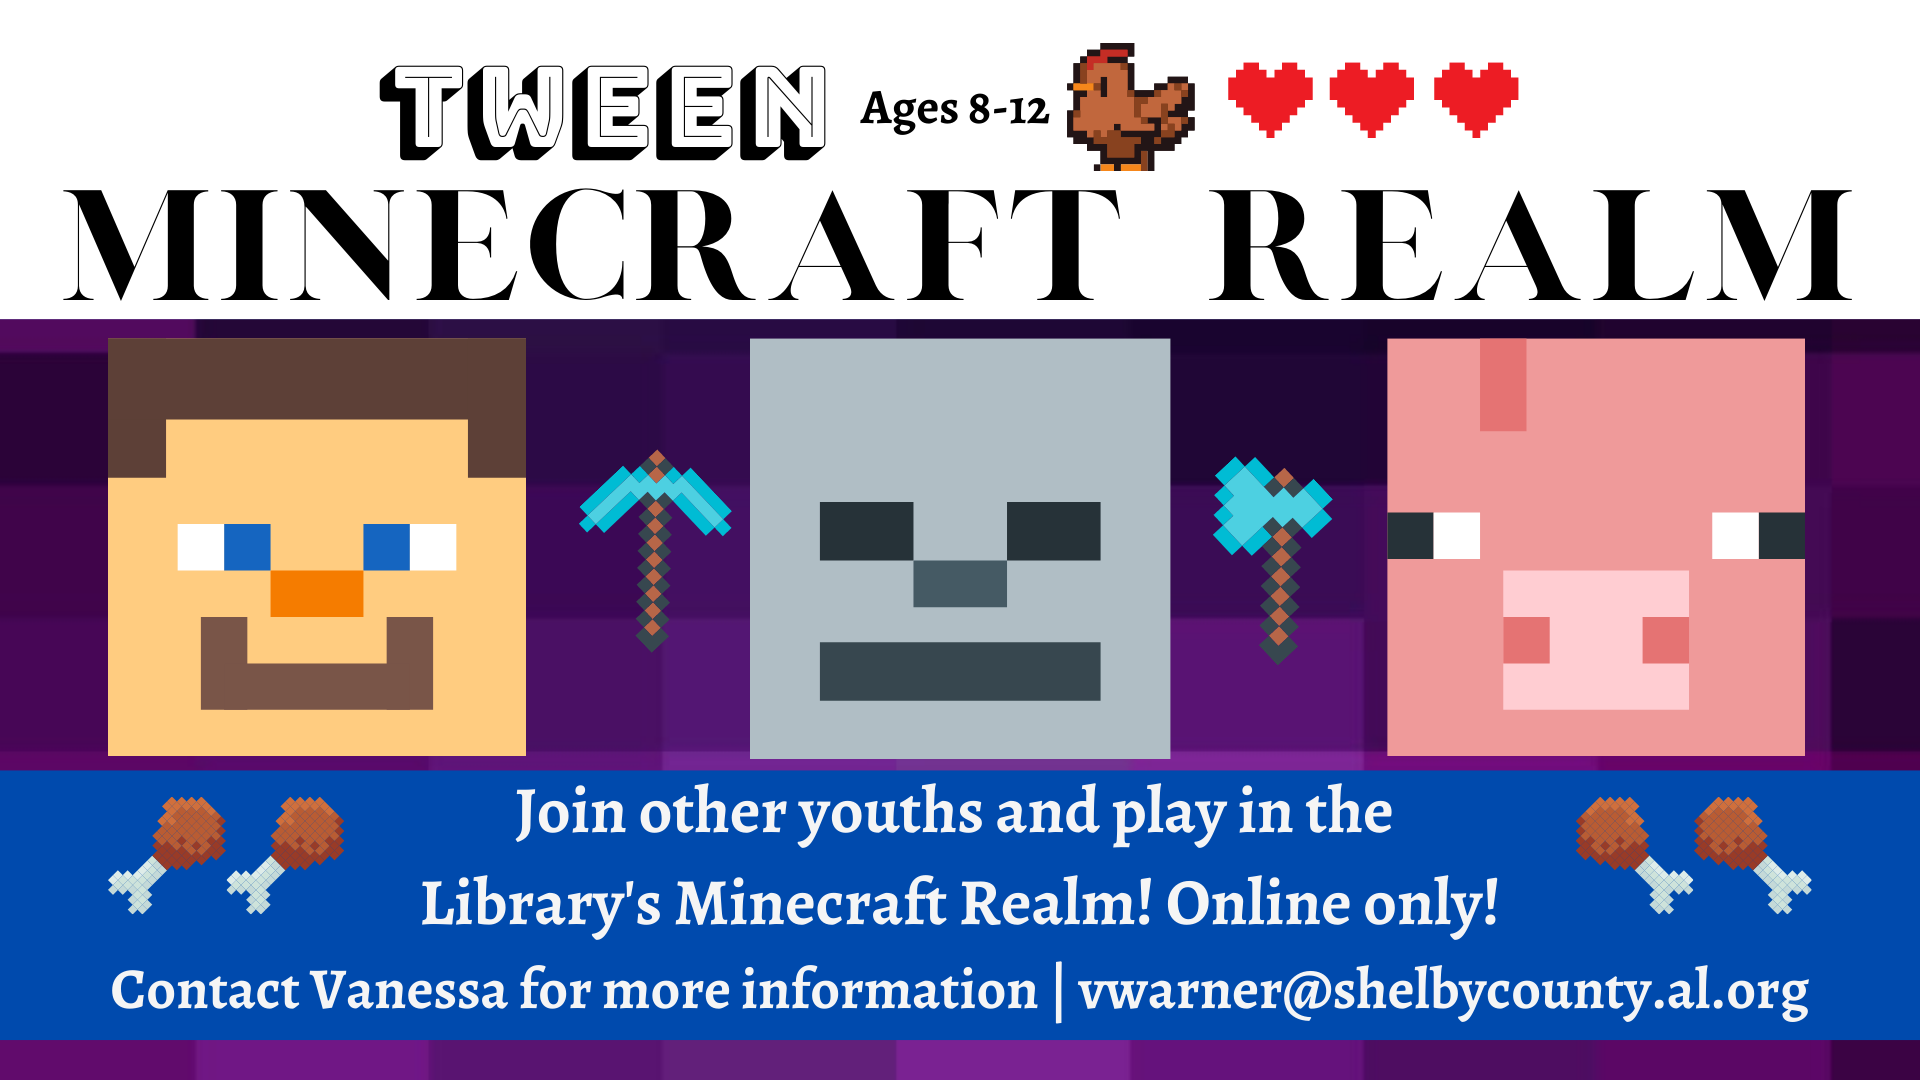 Image advertising the Tween Minecraft Realm featuring the faces of Steve, a Skeleton, and a Pig.